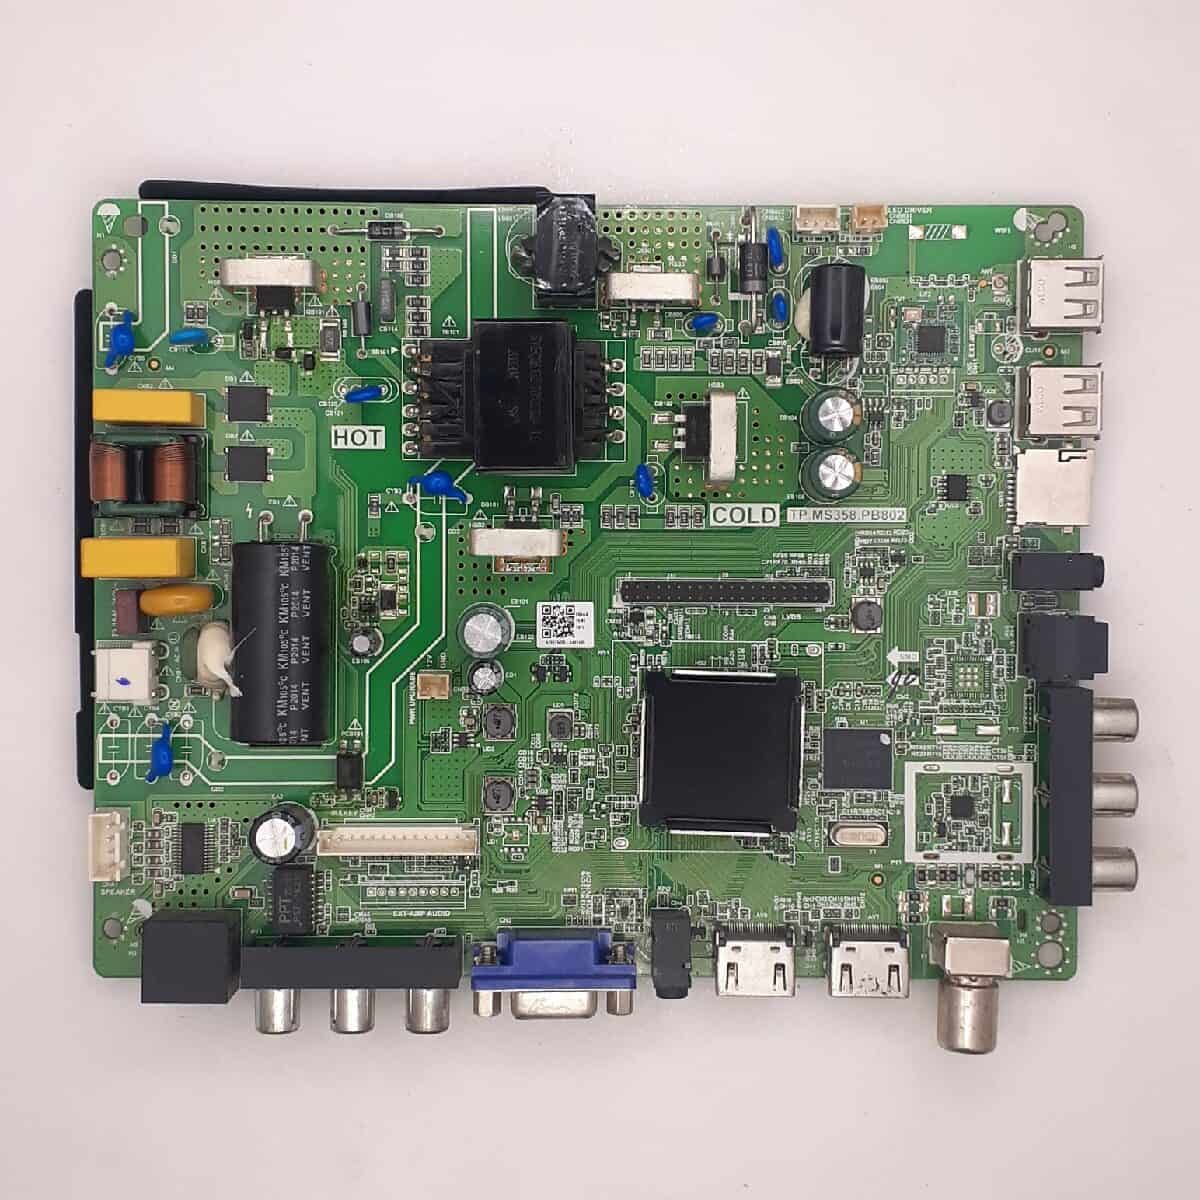 A43FDS963 AISEN MOTHERBOARD FOR LED TV ( FULL HD ) TP.MS358.PB802 KitBazar